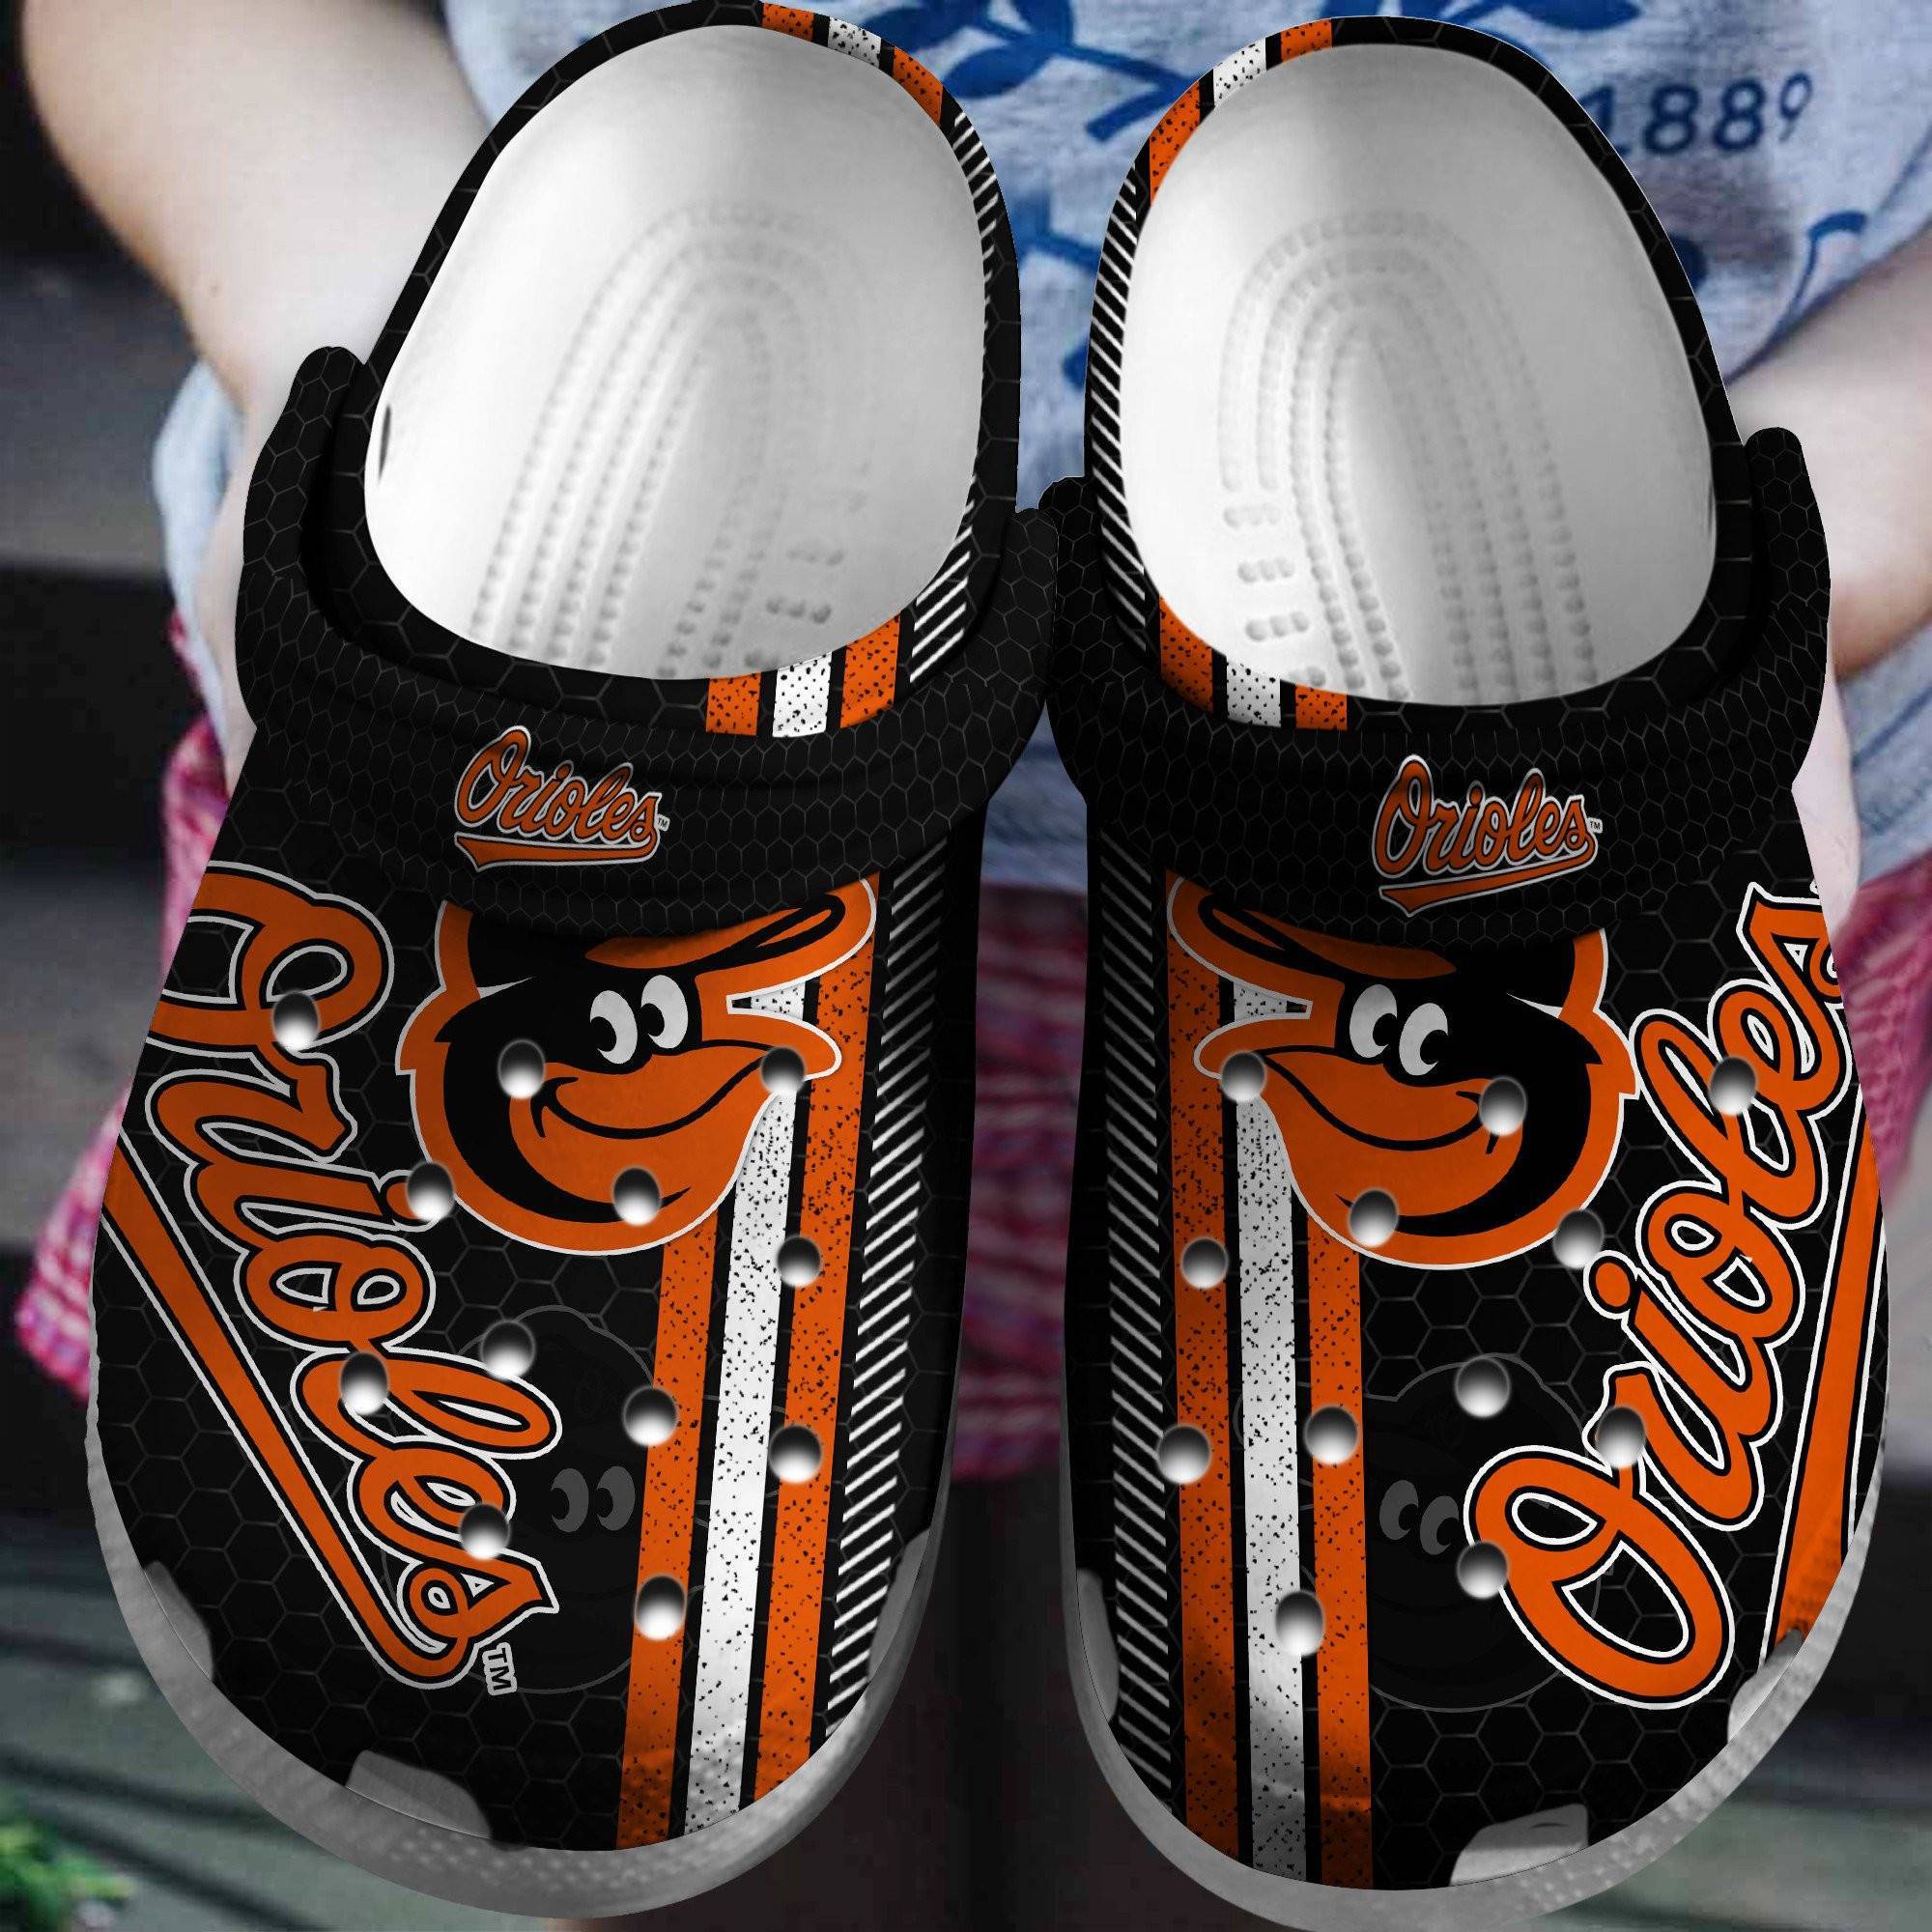 Hot Mlb Team Baltimore Orioles Orange – Black Crocss Clog Shoesshoes Trusted Shopping Online In The World